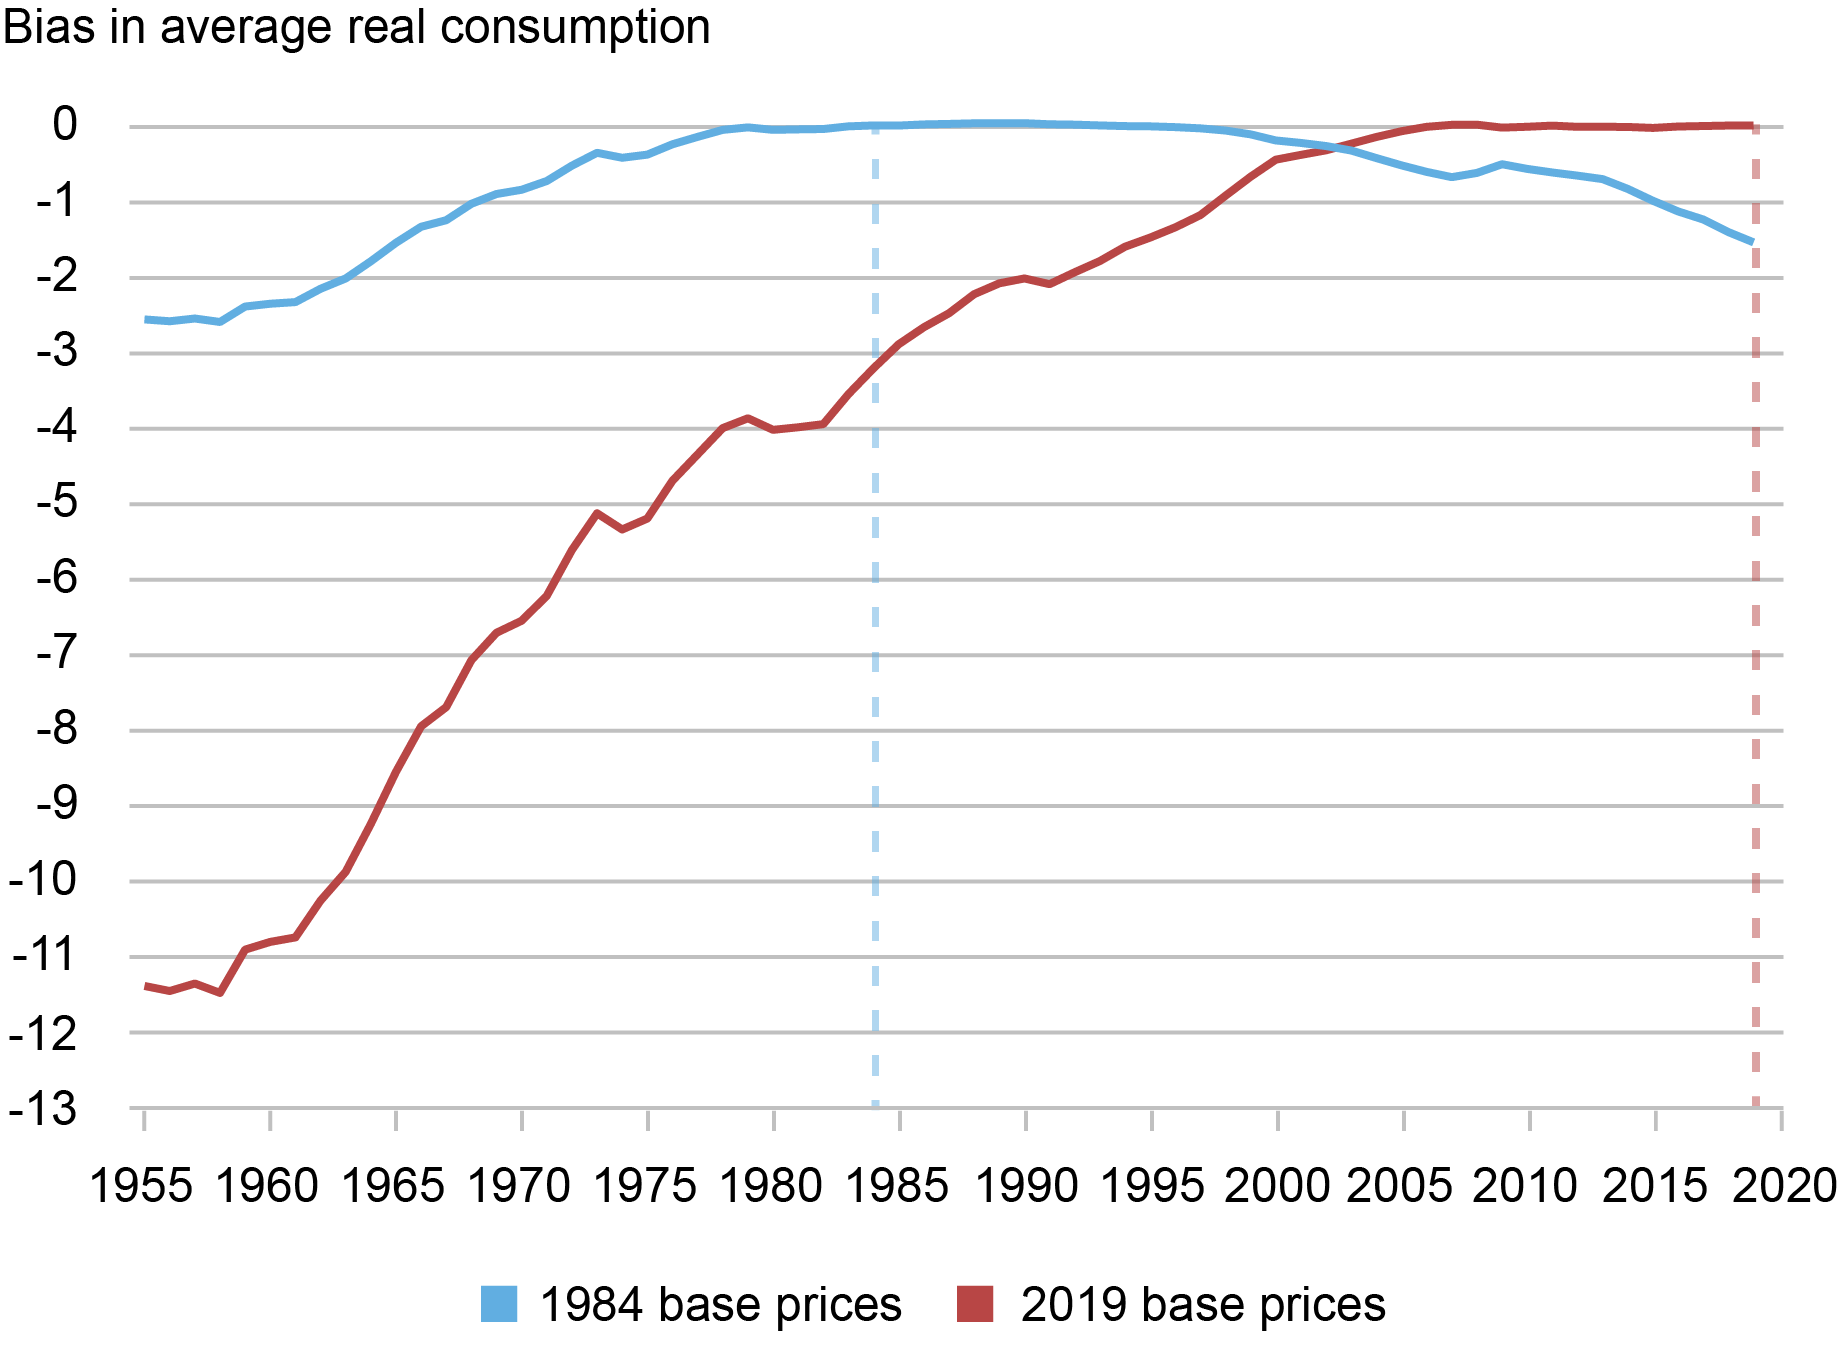 Liberty Street Economics line chart comparing the biases in the level of average real consumption per household using conventional measures of real consumption against the new methodology, using 1984 and 2019 base prices for calculating real consumption. 